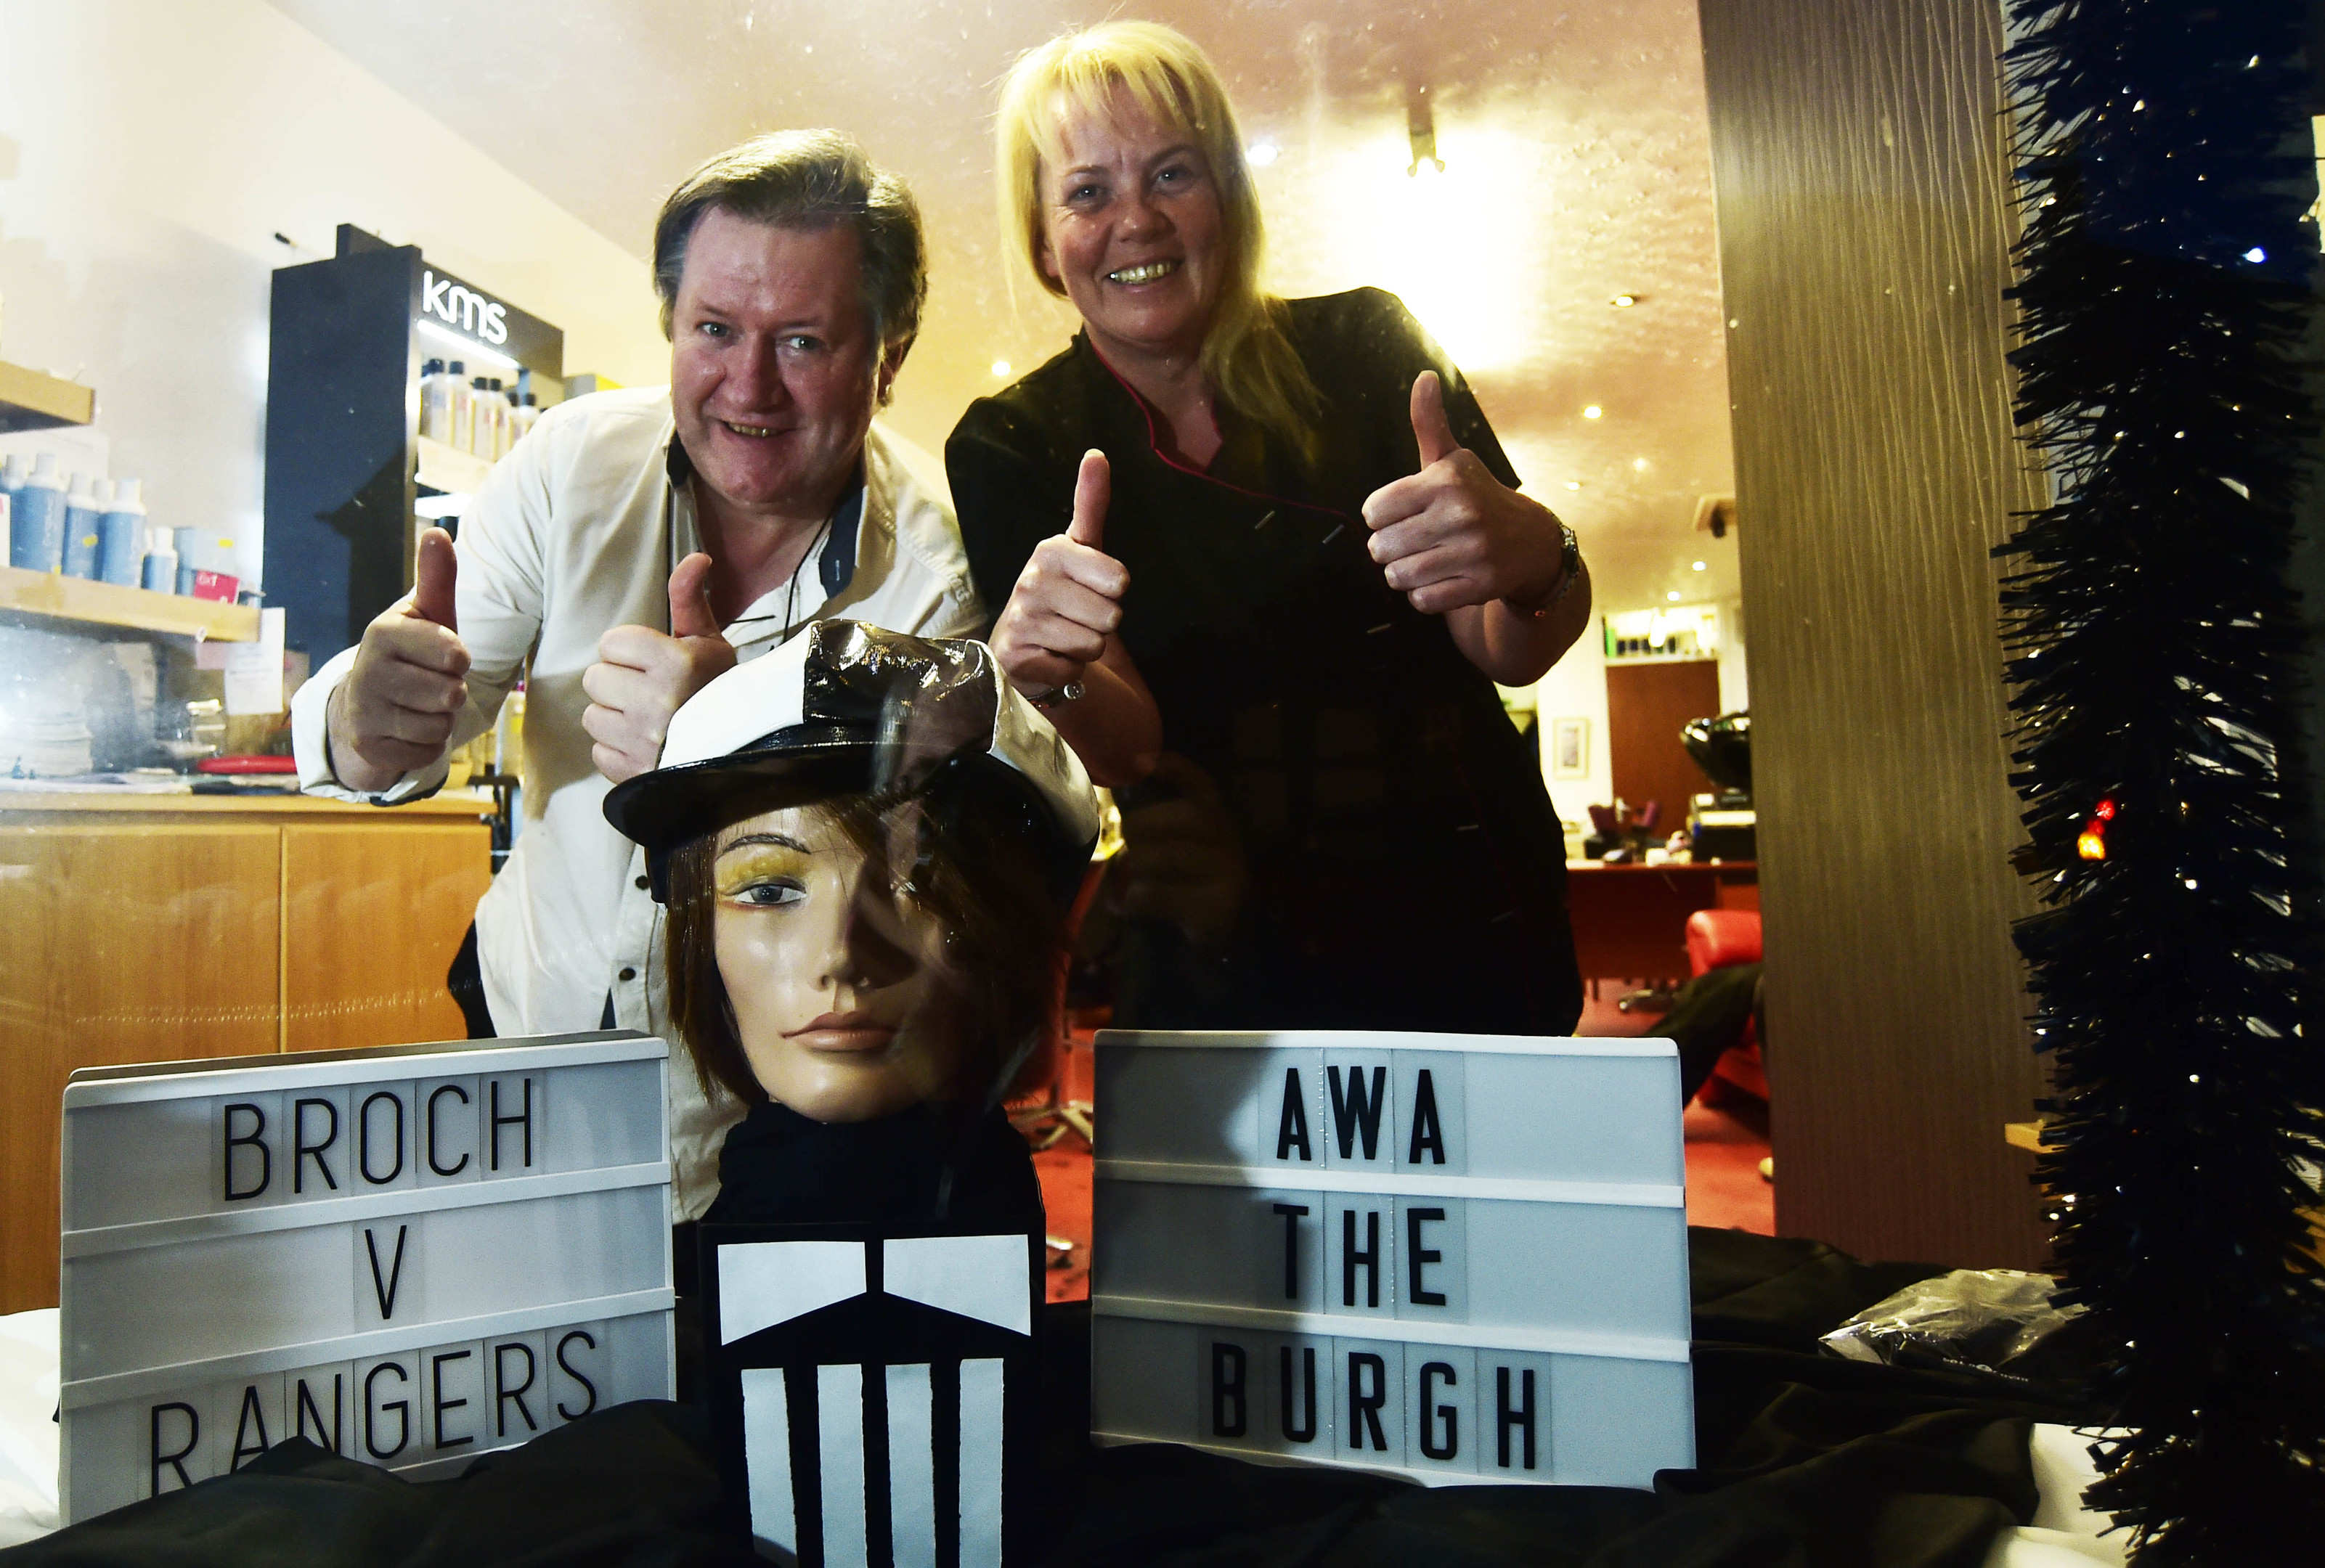 HAIRDRESSERS ALEX NOBLE AND SUSAN PECK FROM THE KATS WHISKERS IN FRASERBURGH